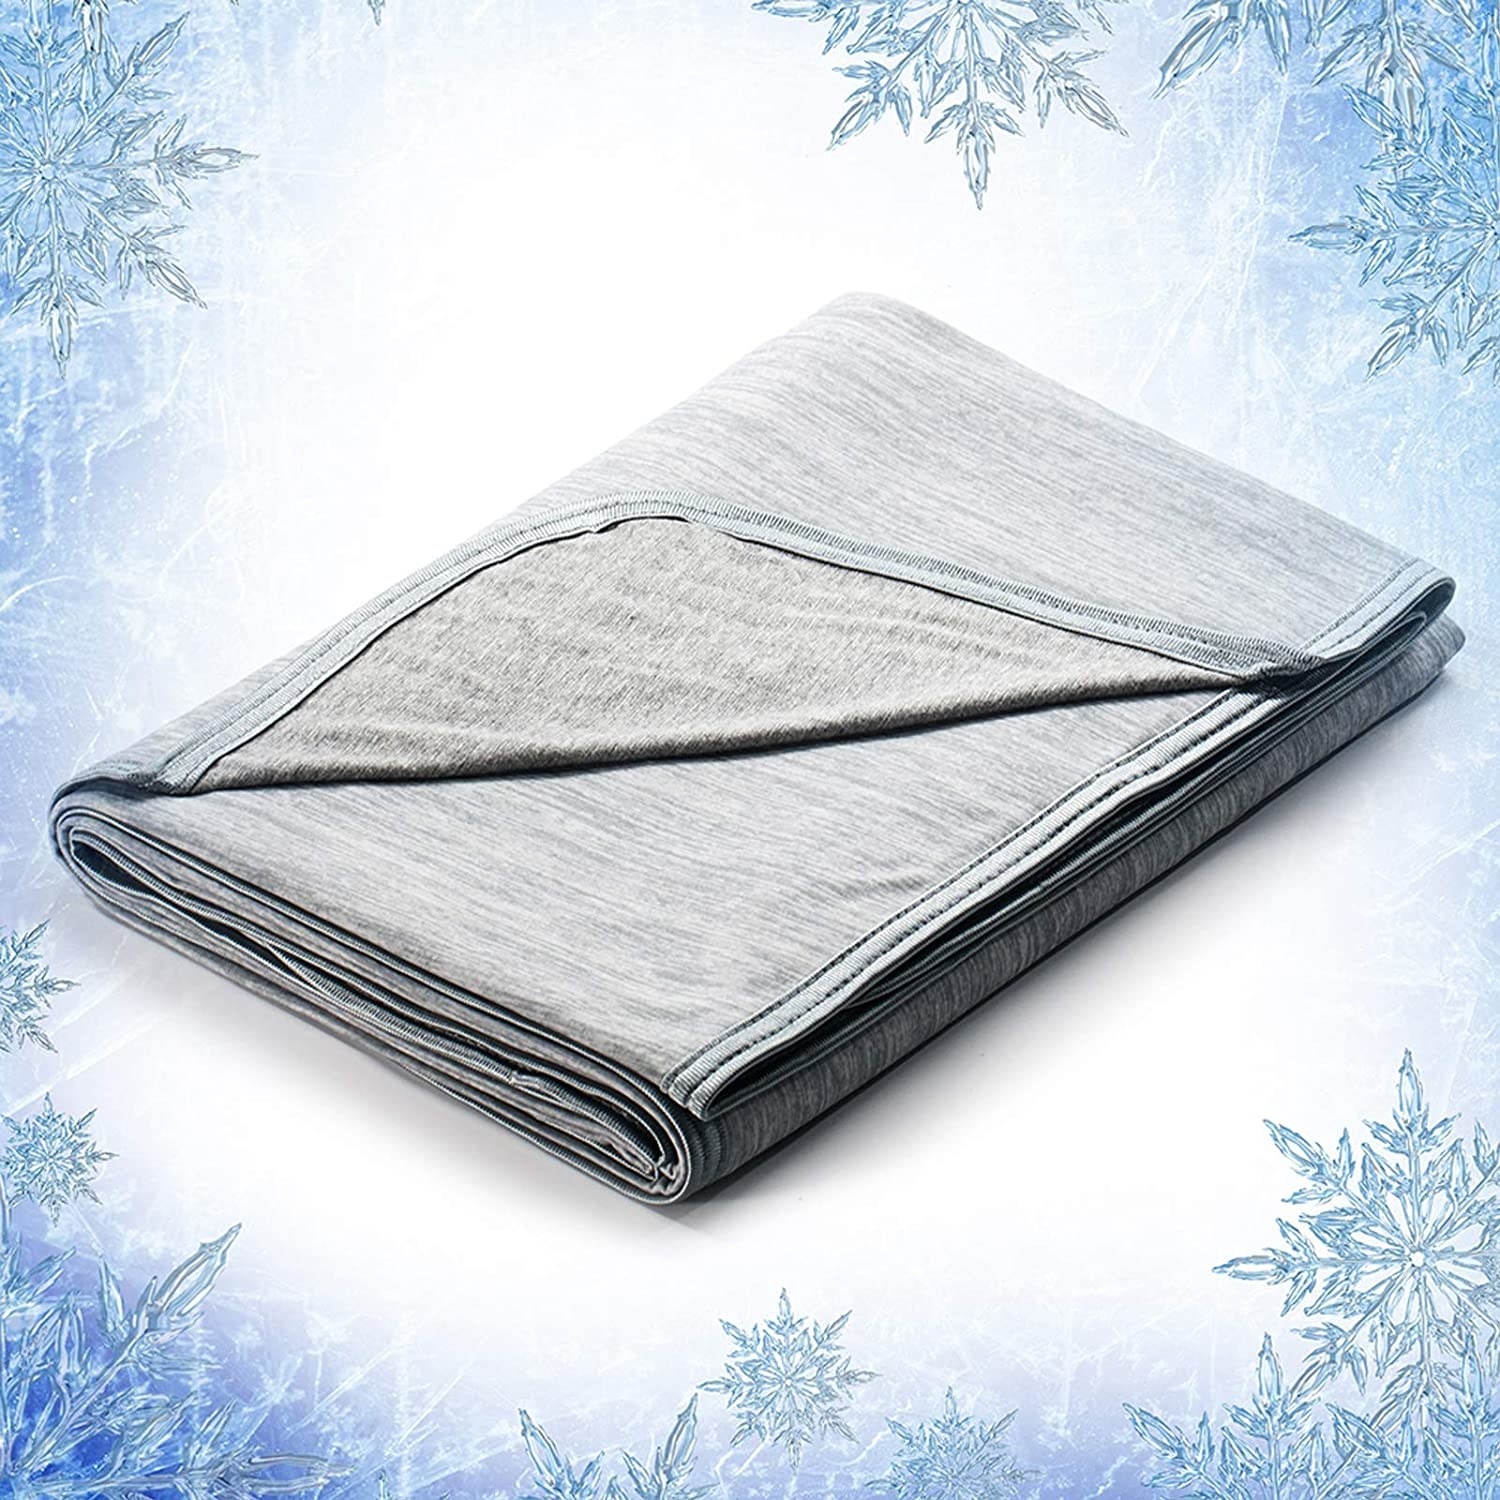 Gray cooling blanket on ice-themed background